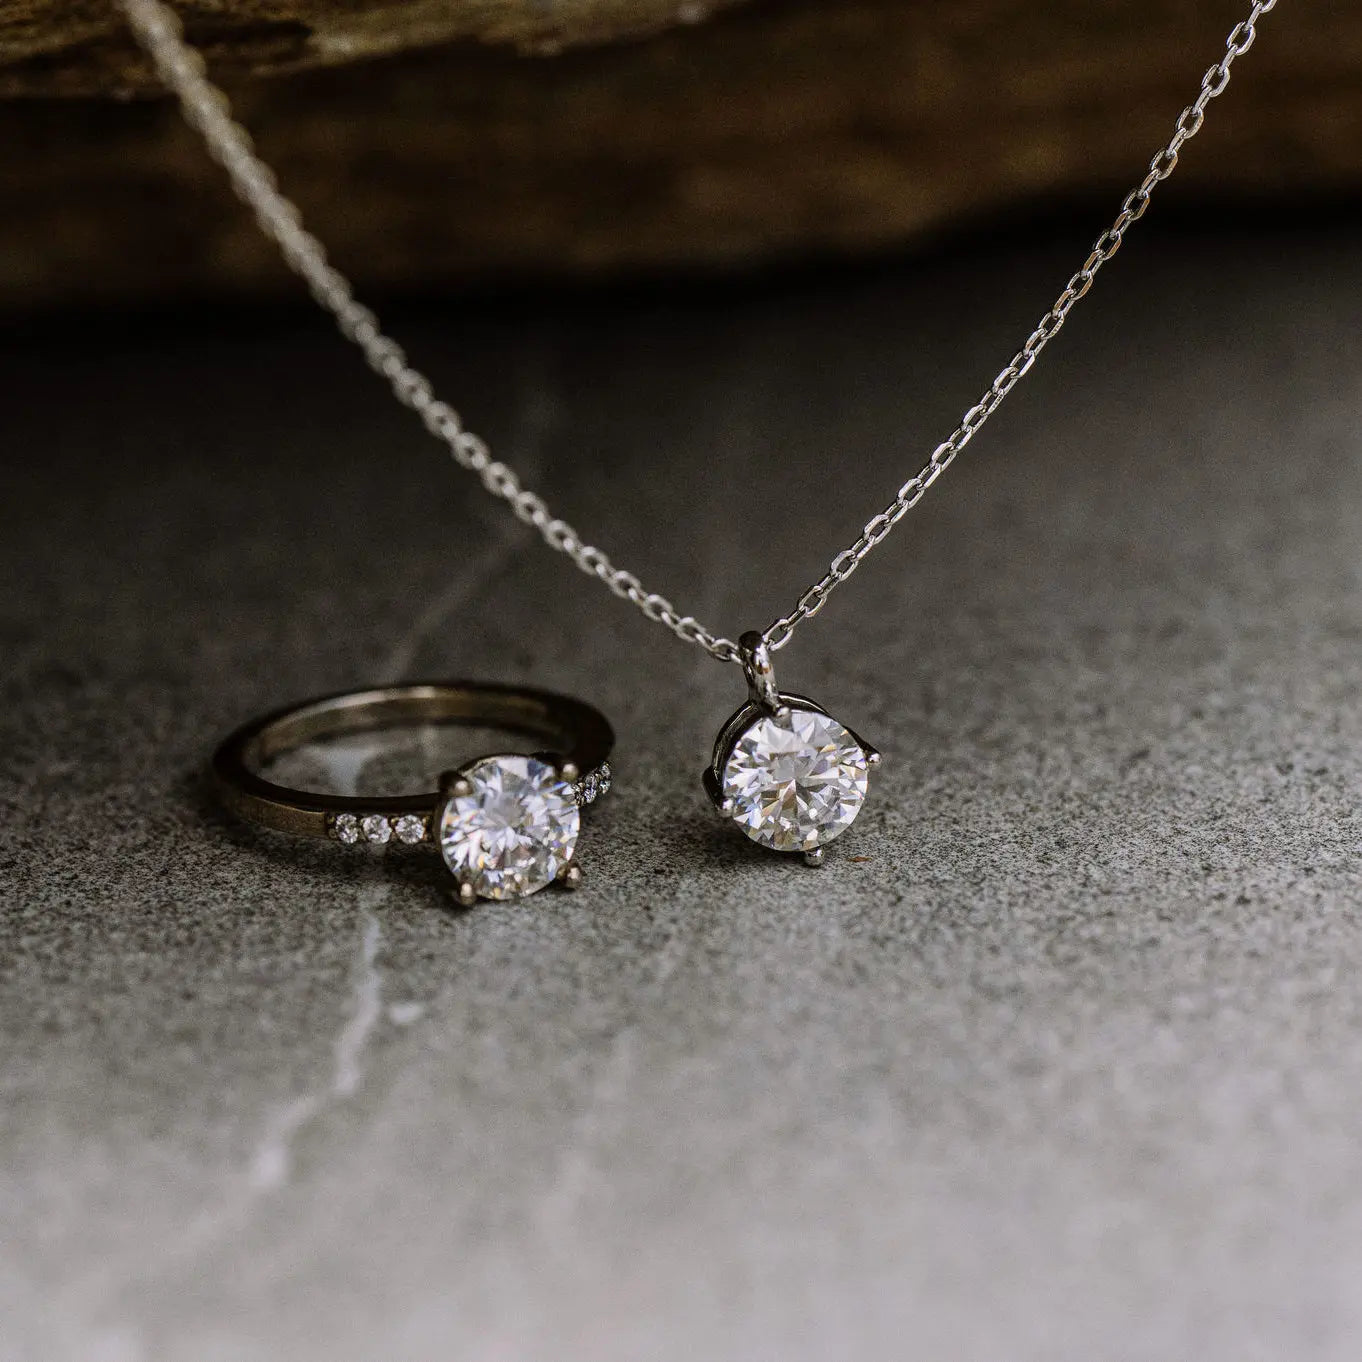 Moissanite Jewellery Sets, a Wonderful Gift for Mom